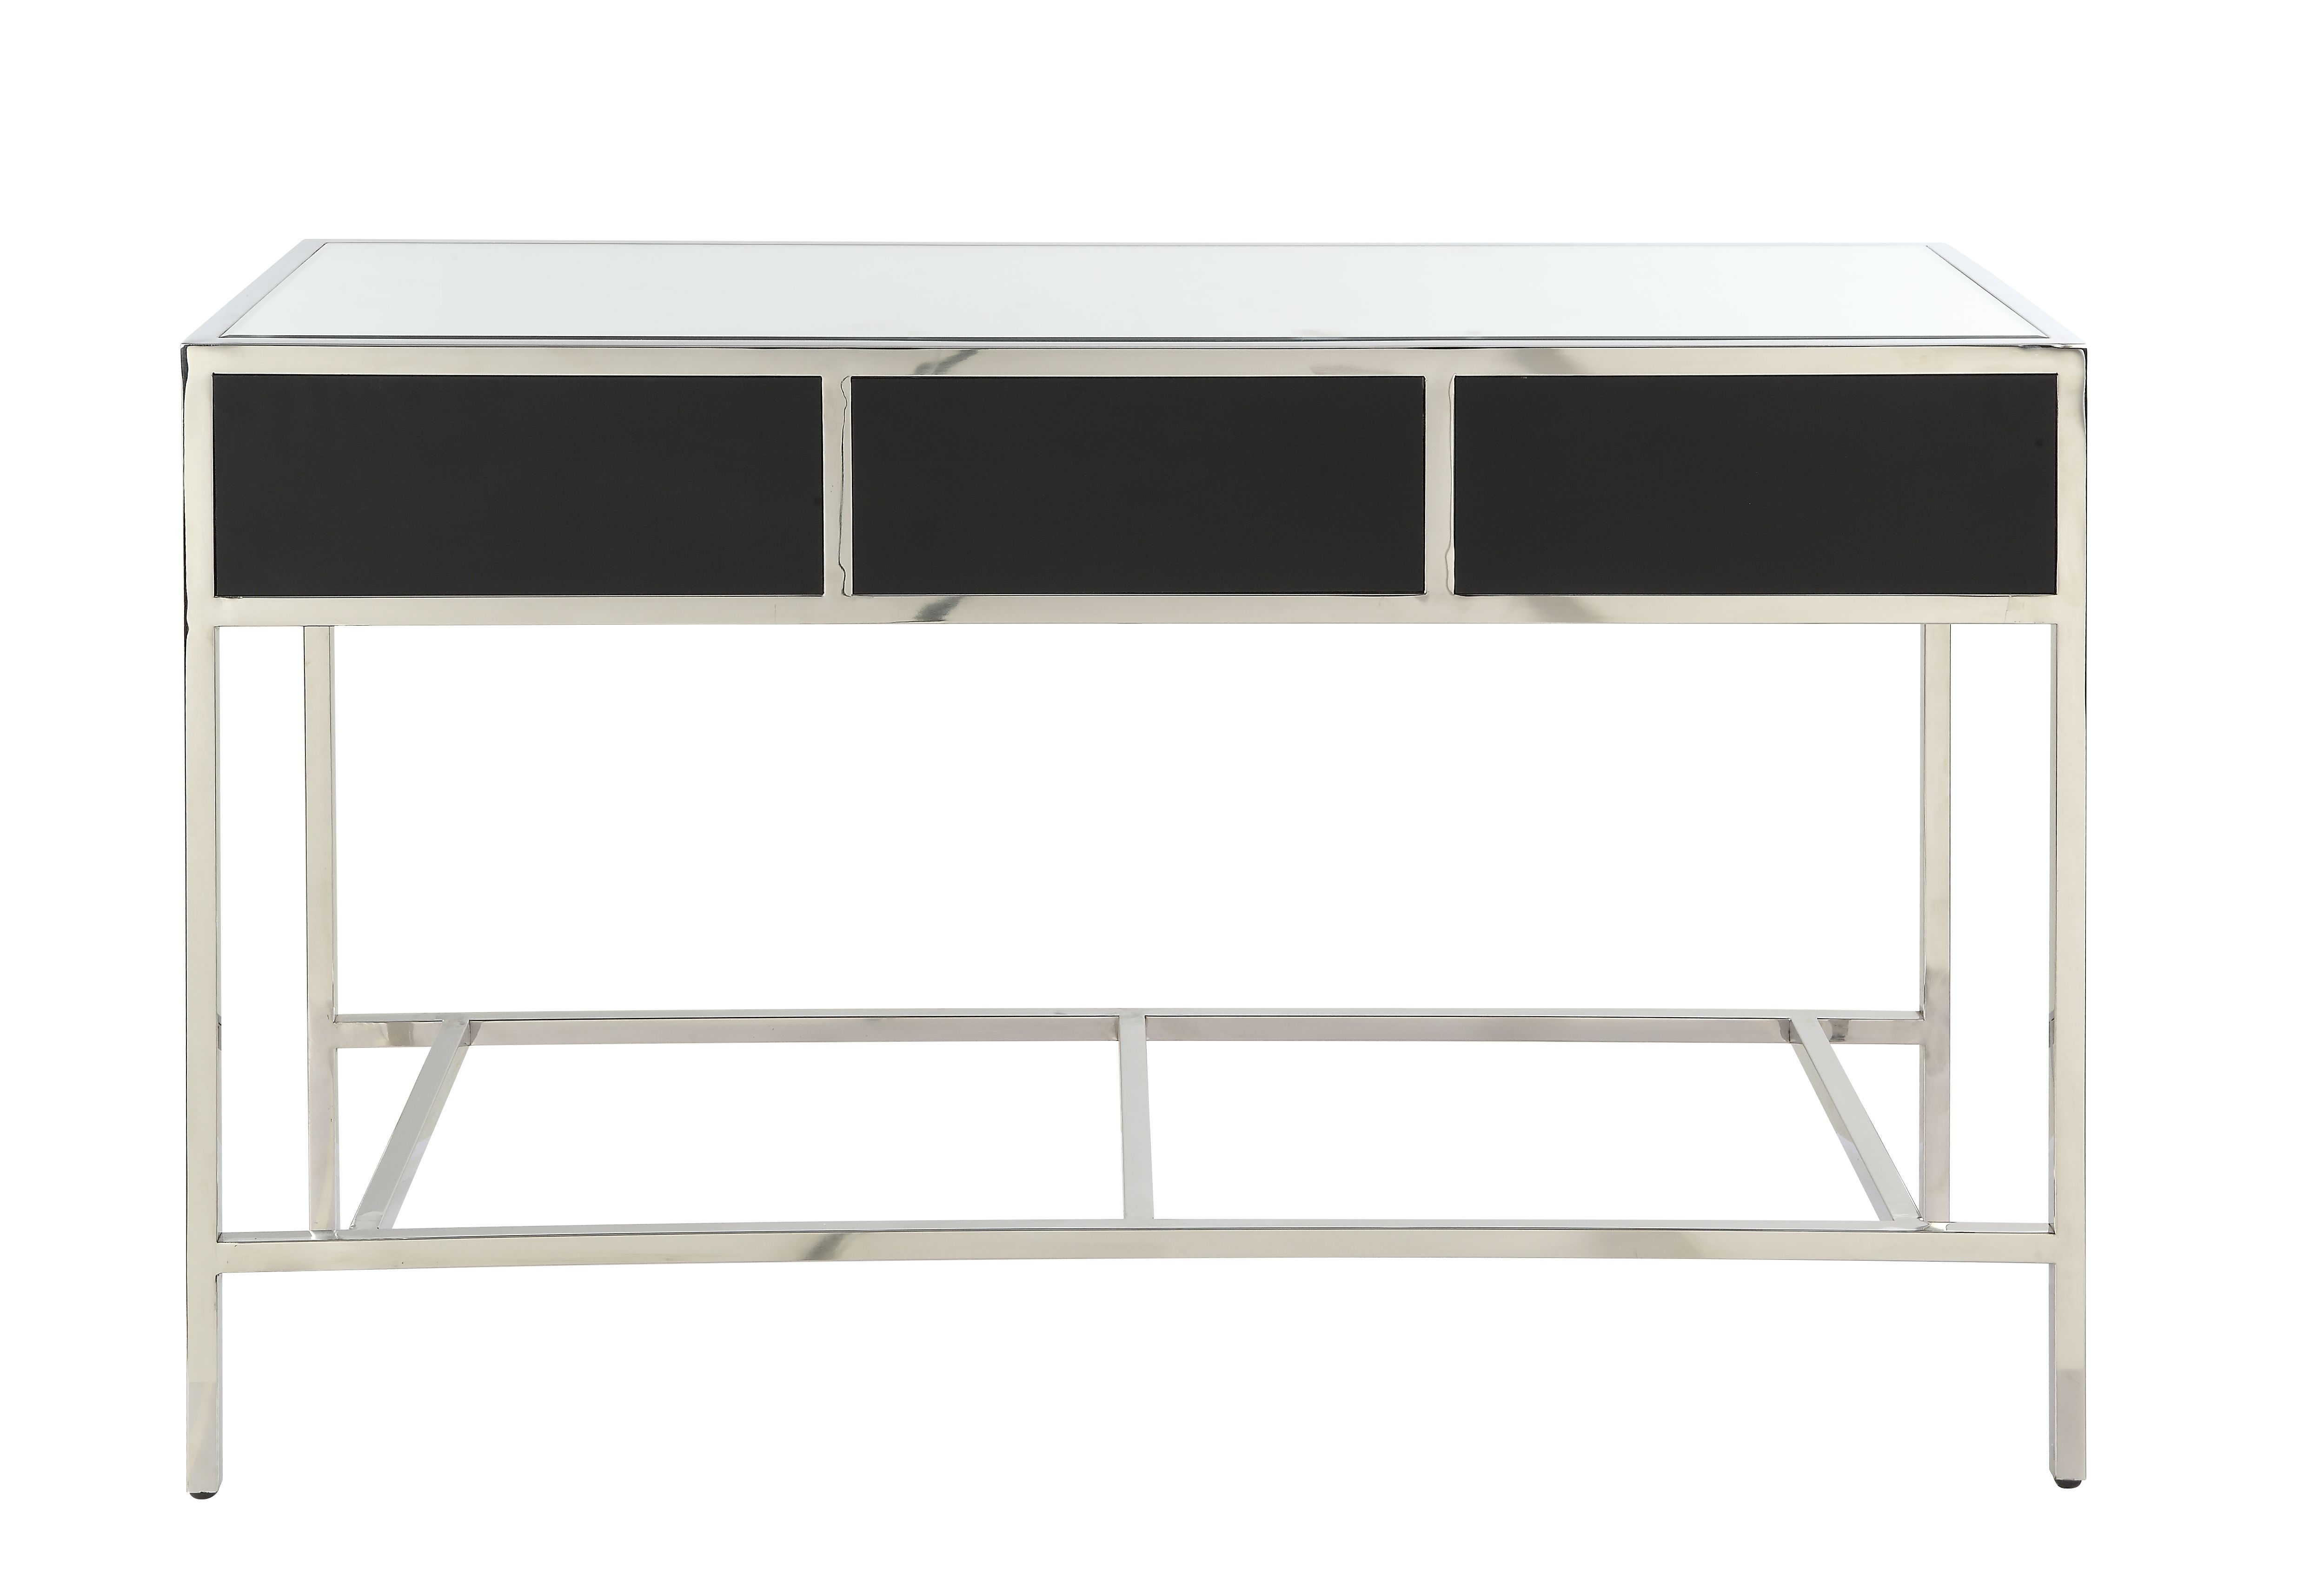 ACME Weigela Rectangular Sofa Table in Mirrored and Chrome - image 4 of 7